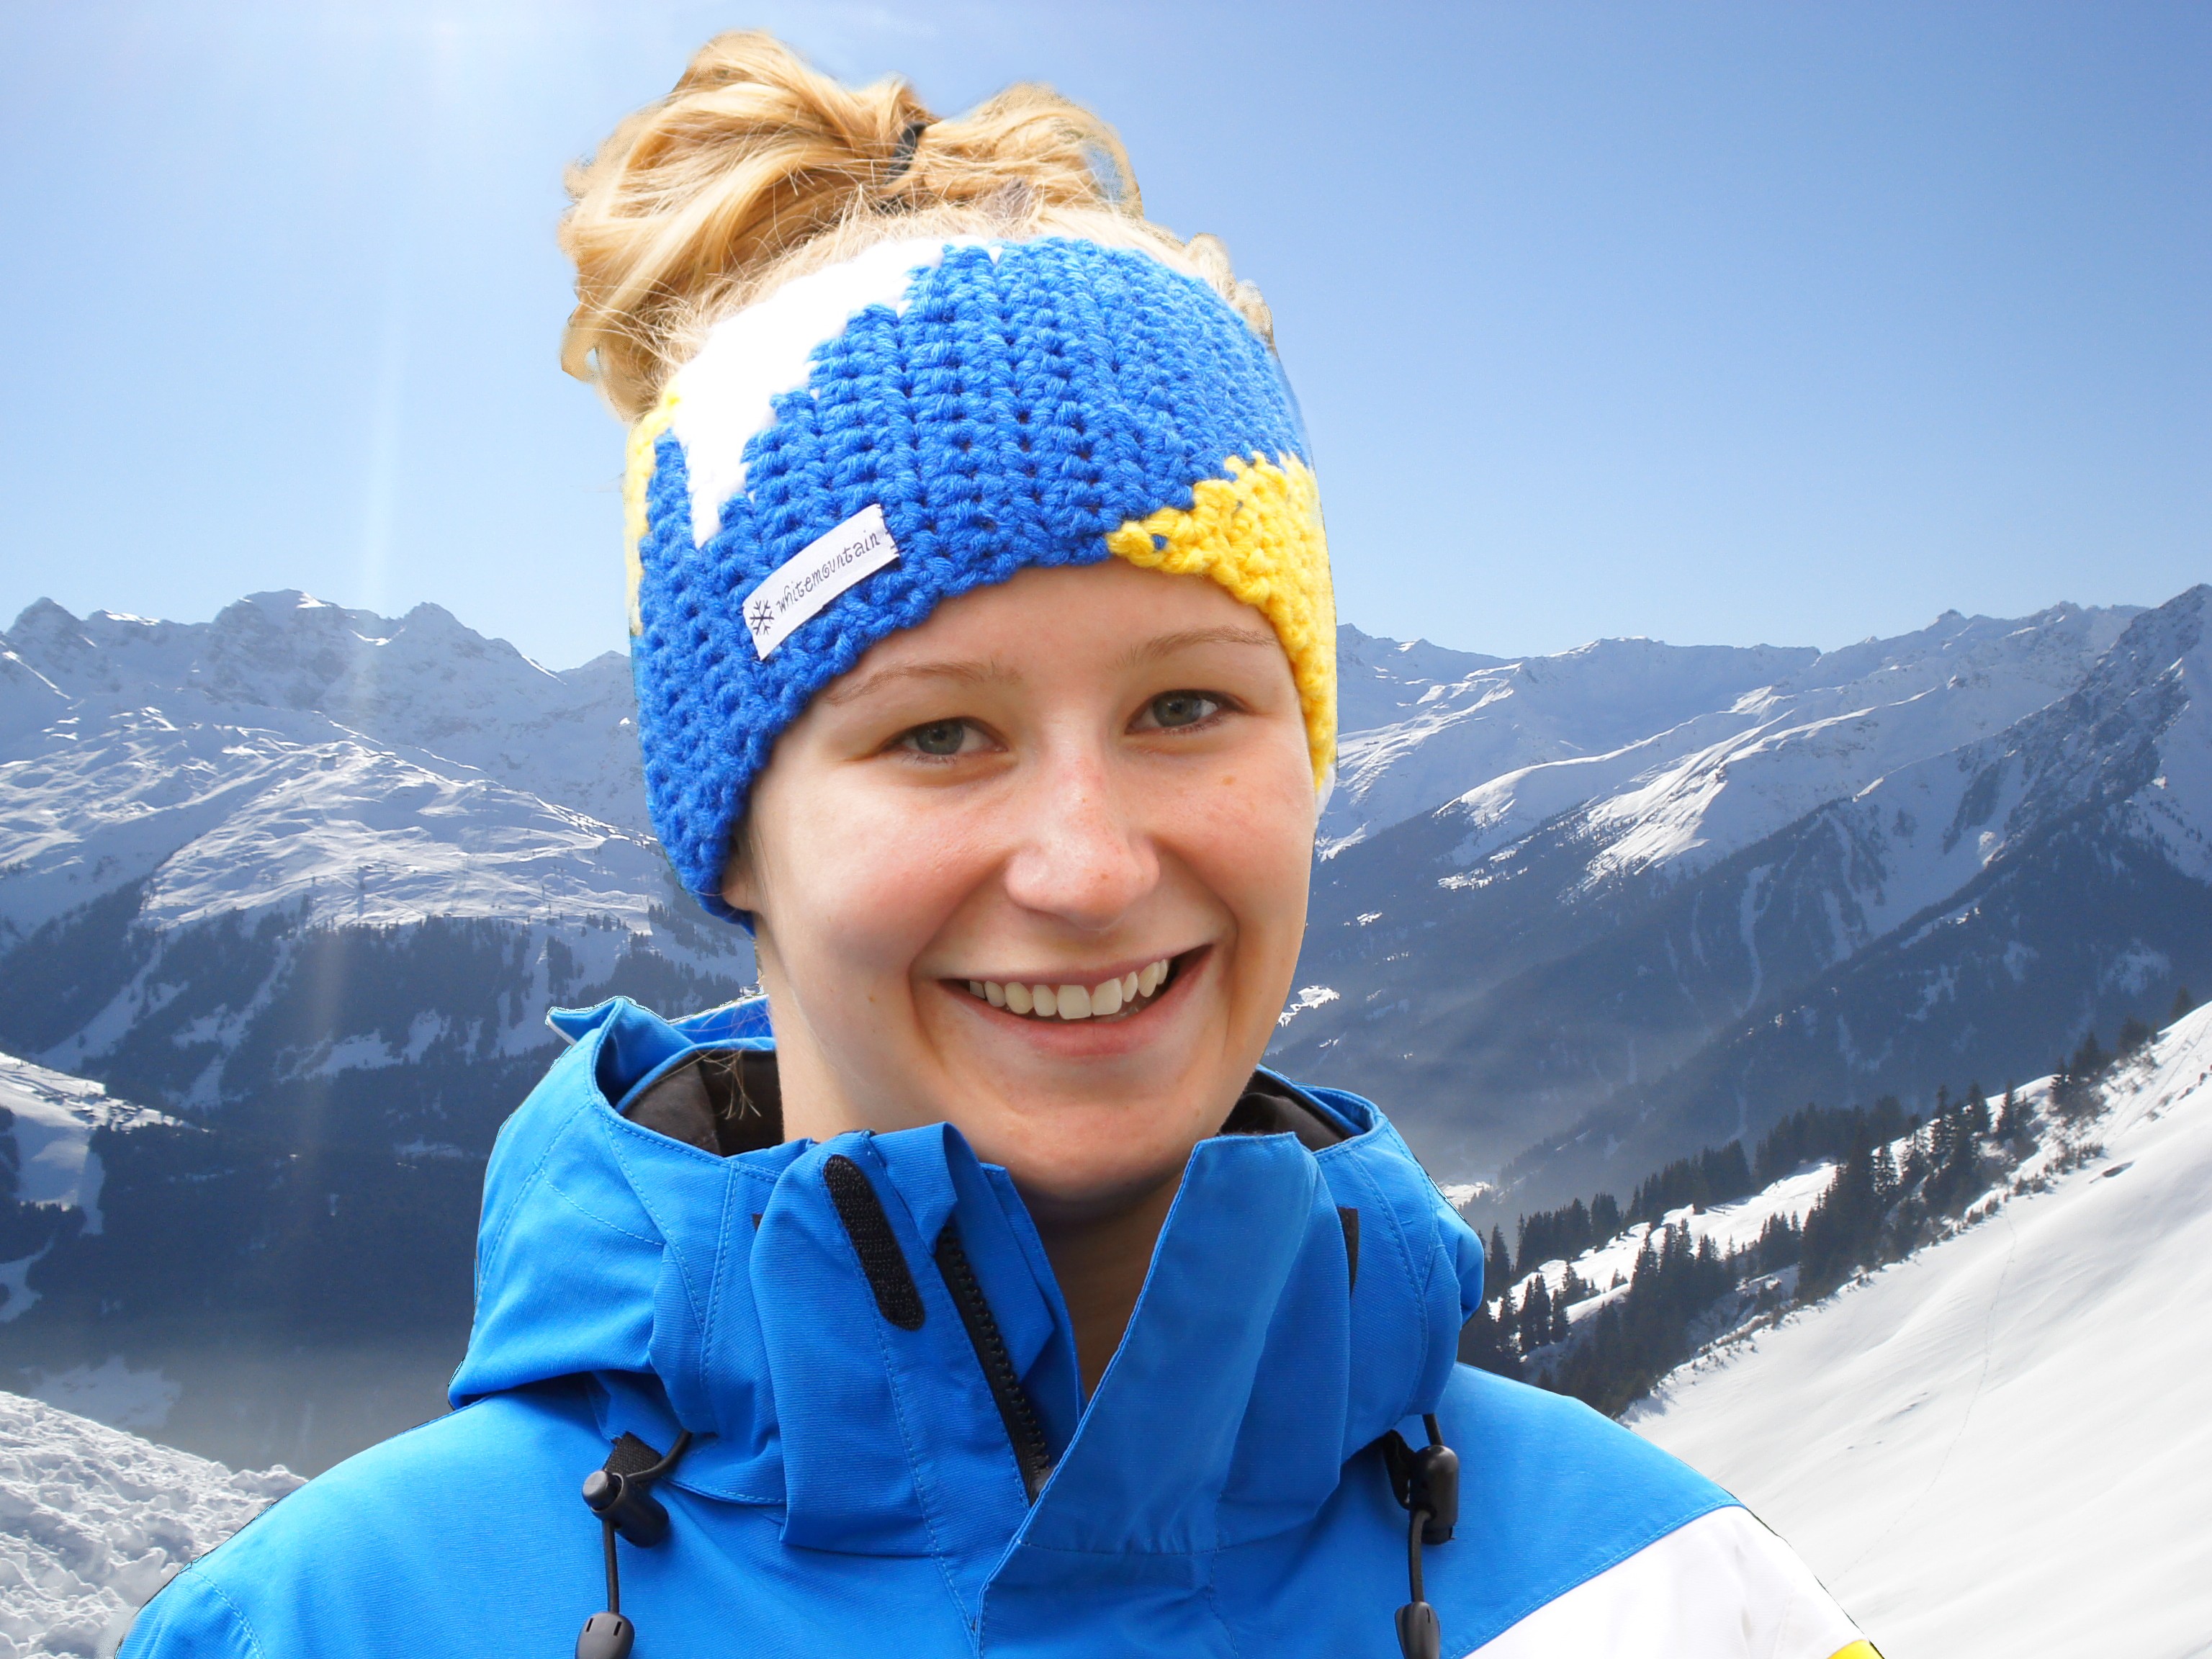 In her free time, Emma, working in the Global Marketing, enjoys skiing. 